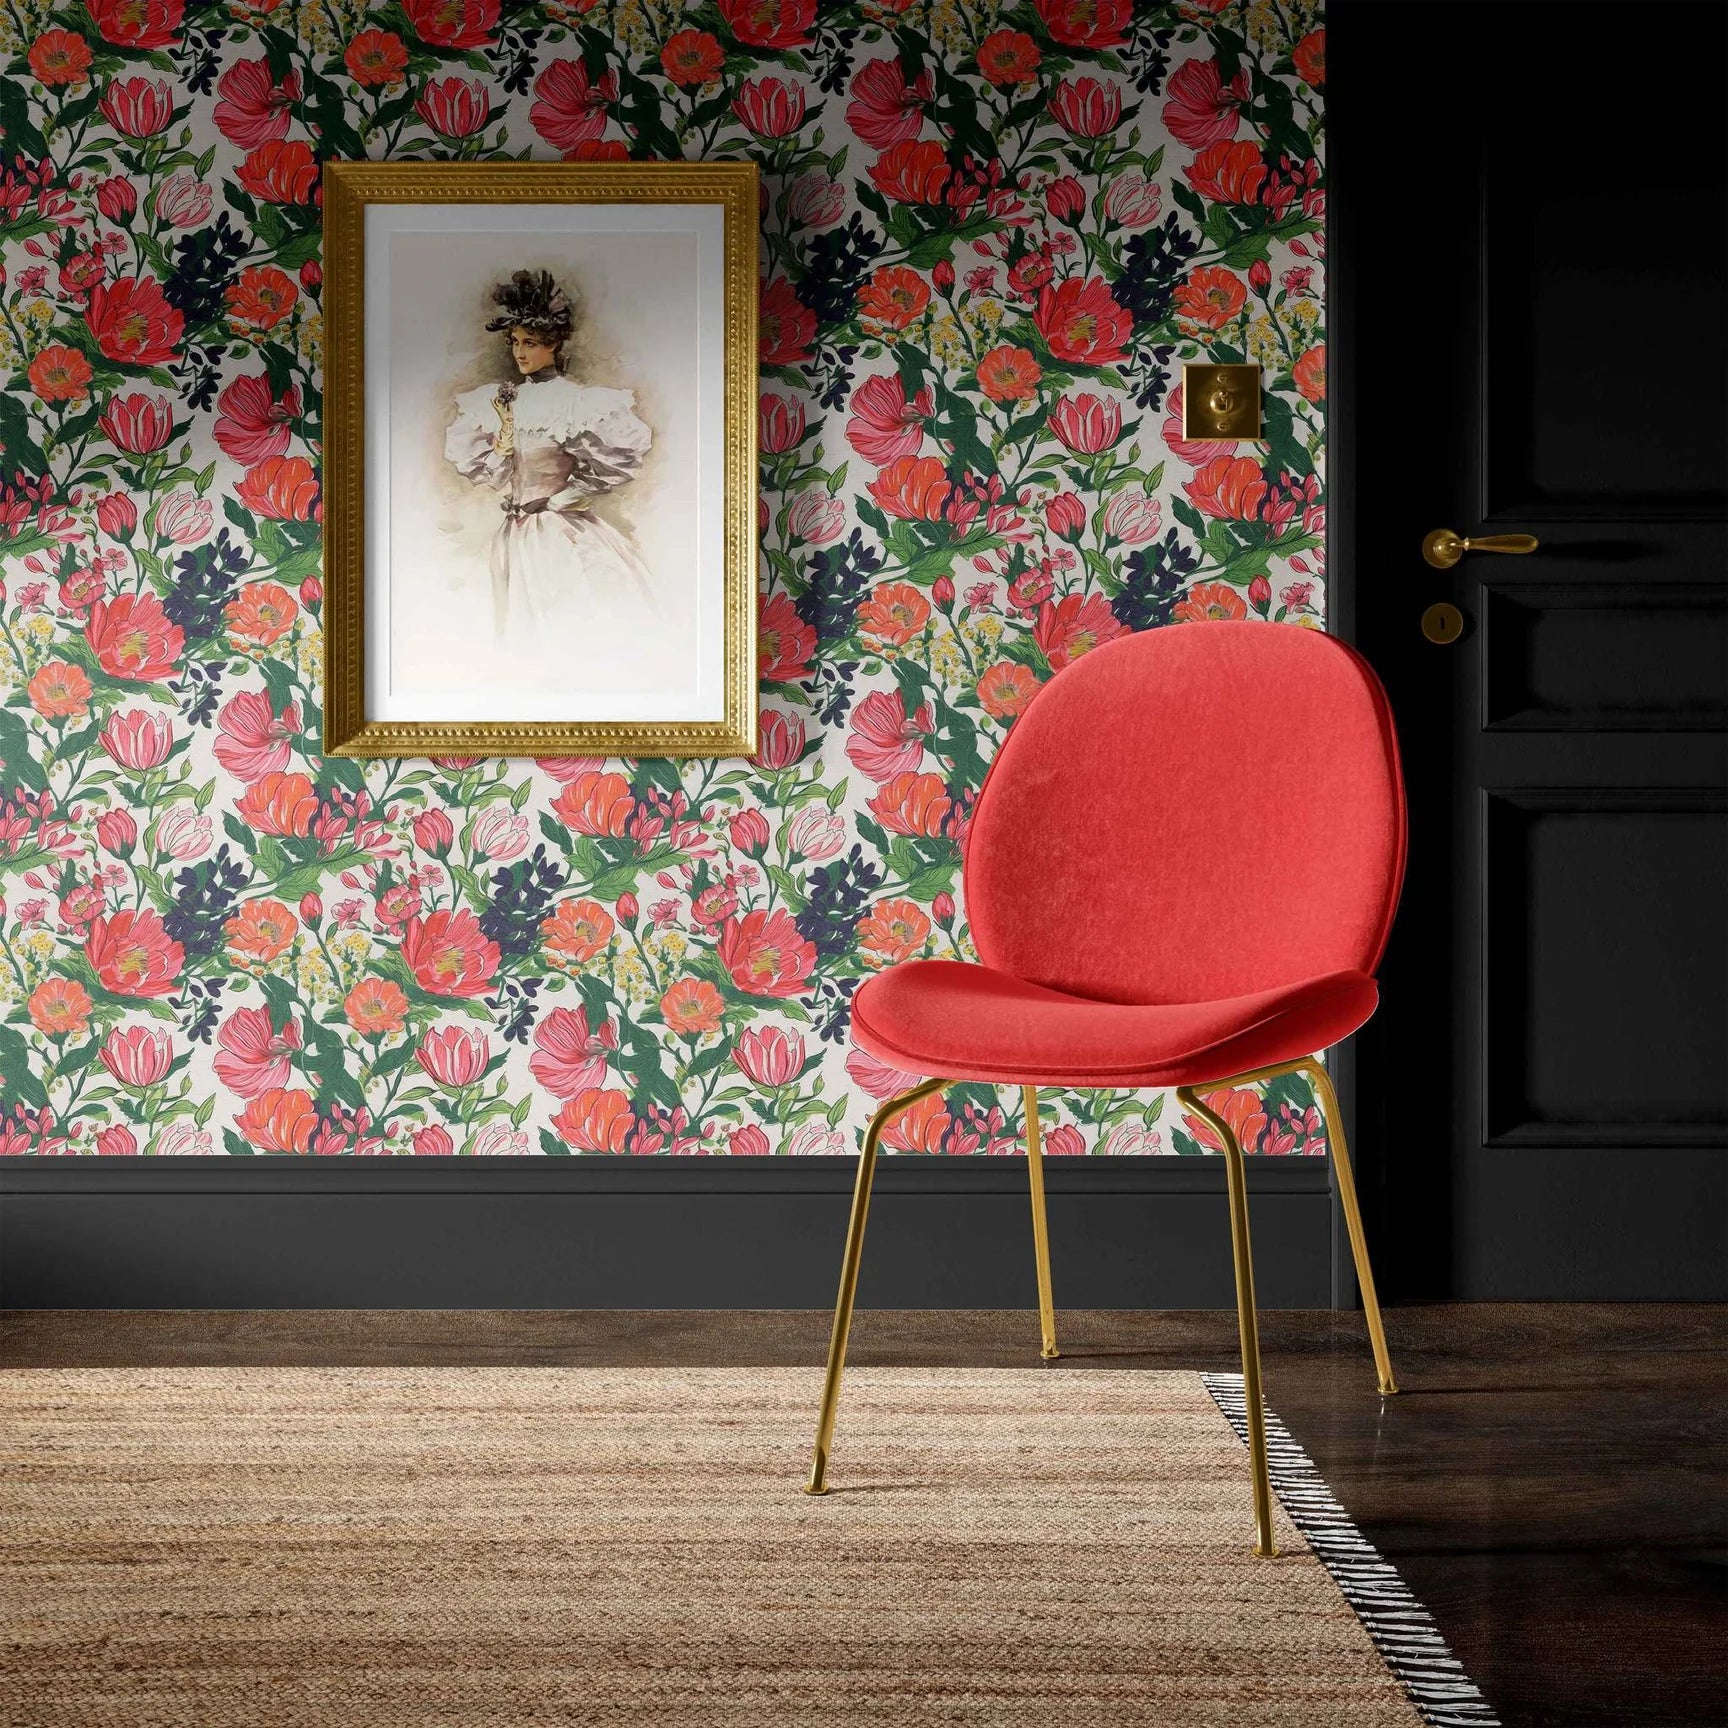 Moody hallway with floral wallpaper